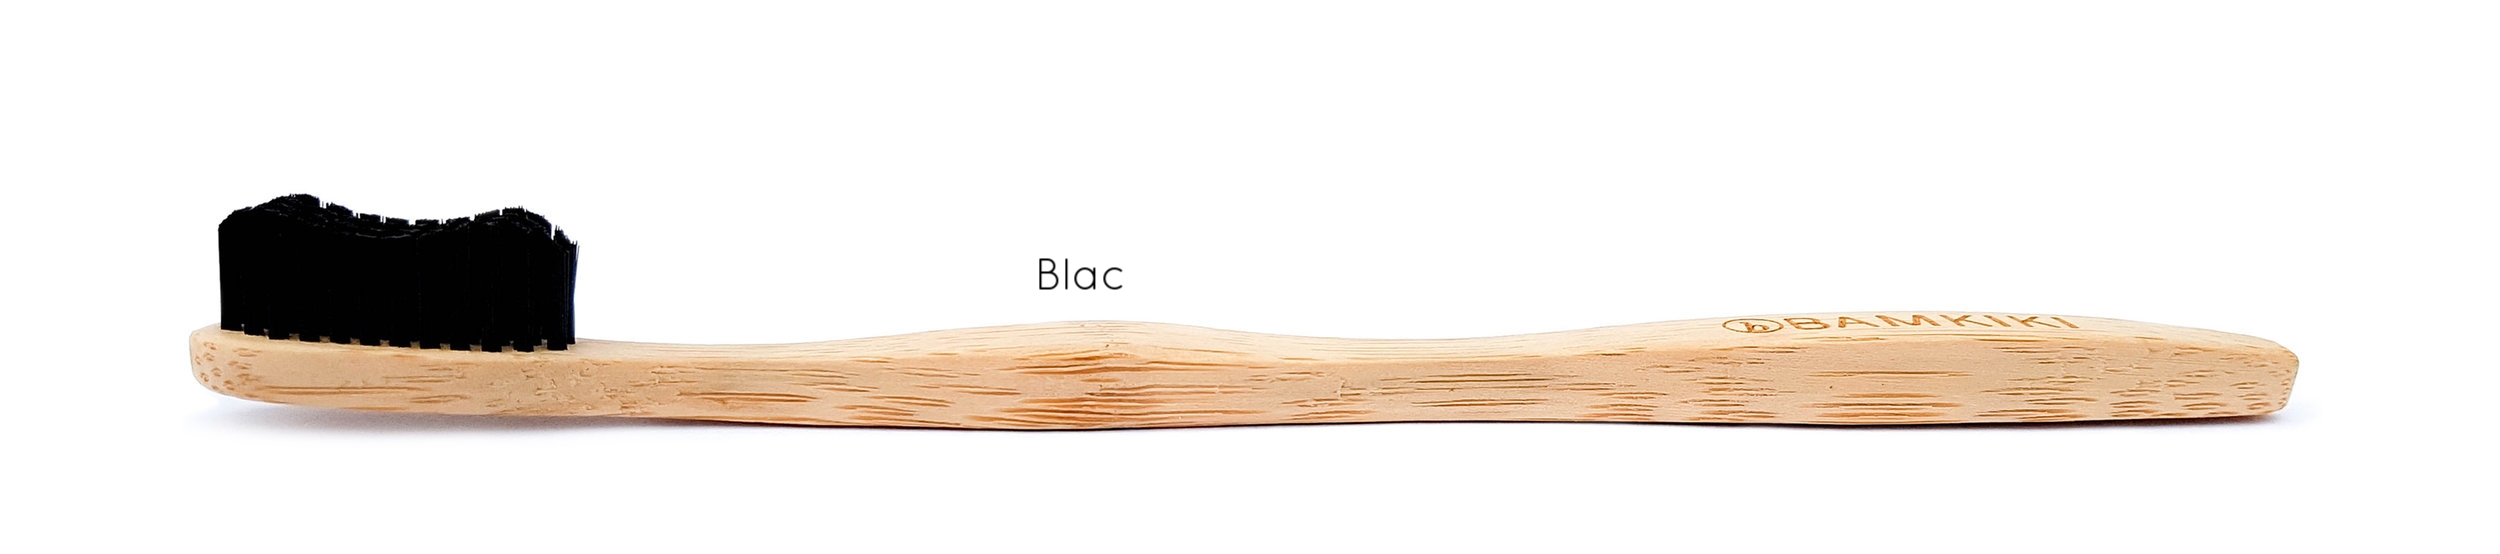 Australia environmentally friendly and biodegradable adult size bamboo toothbrush Blac.